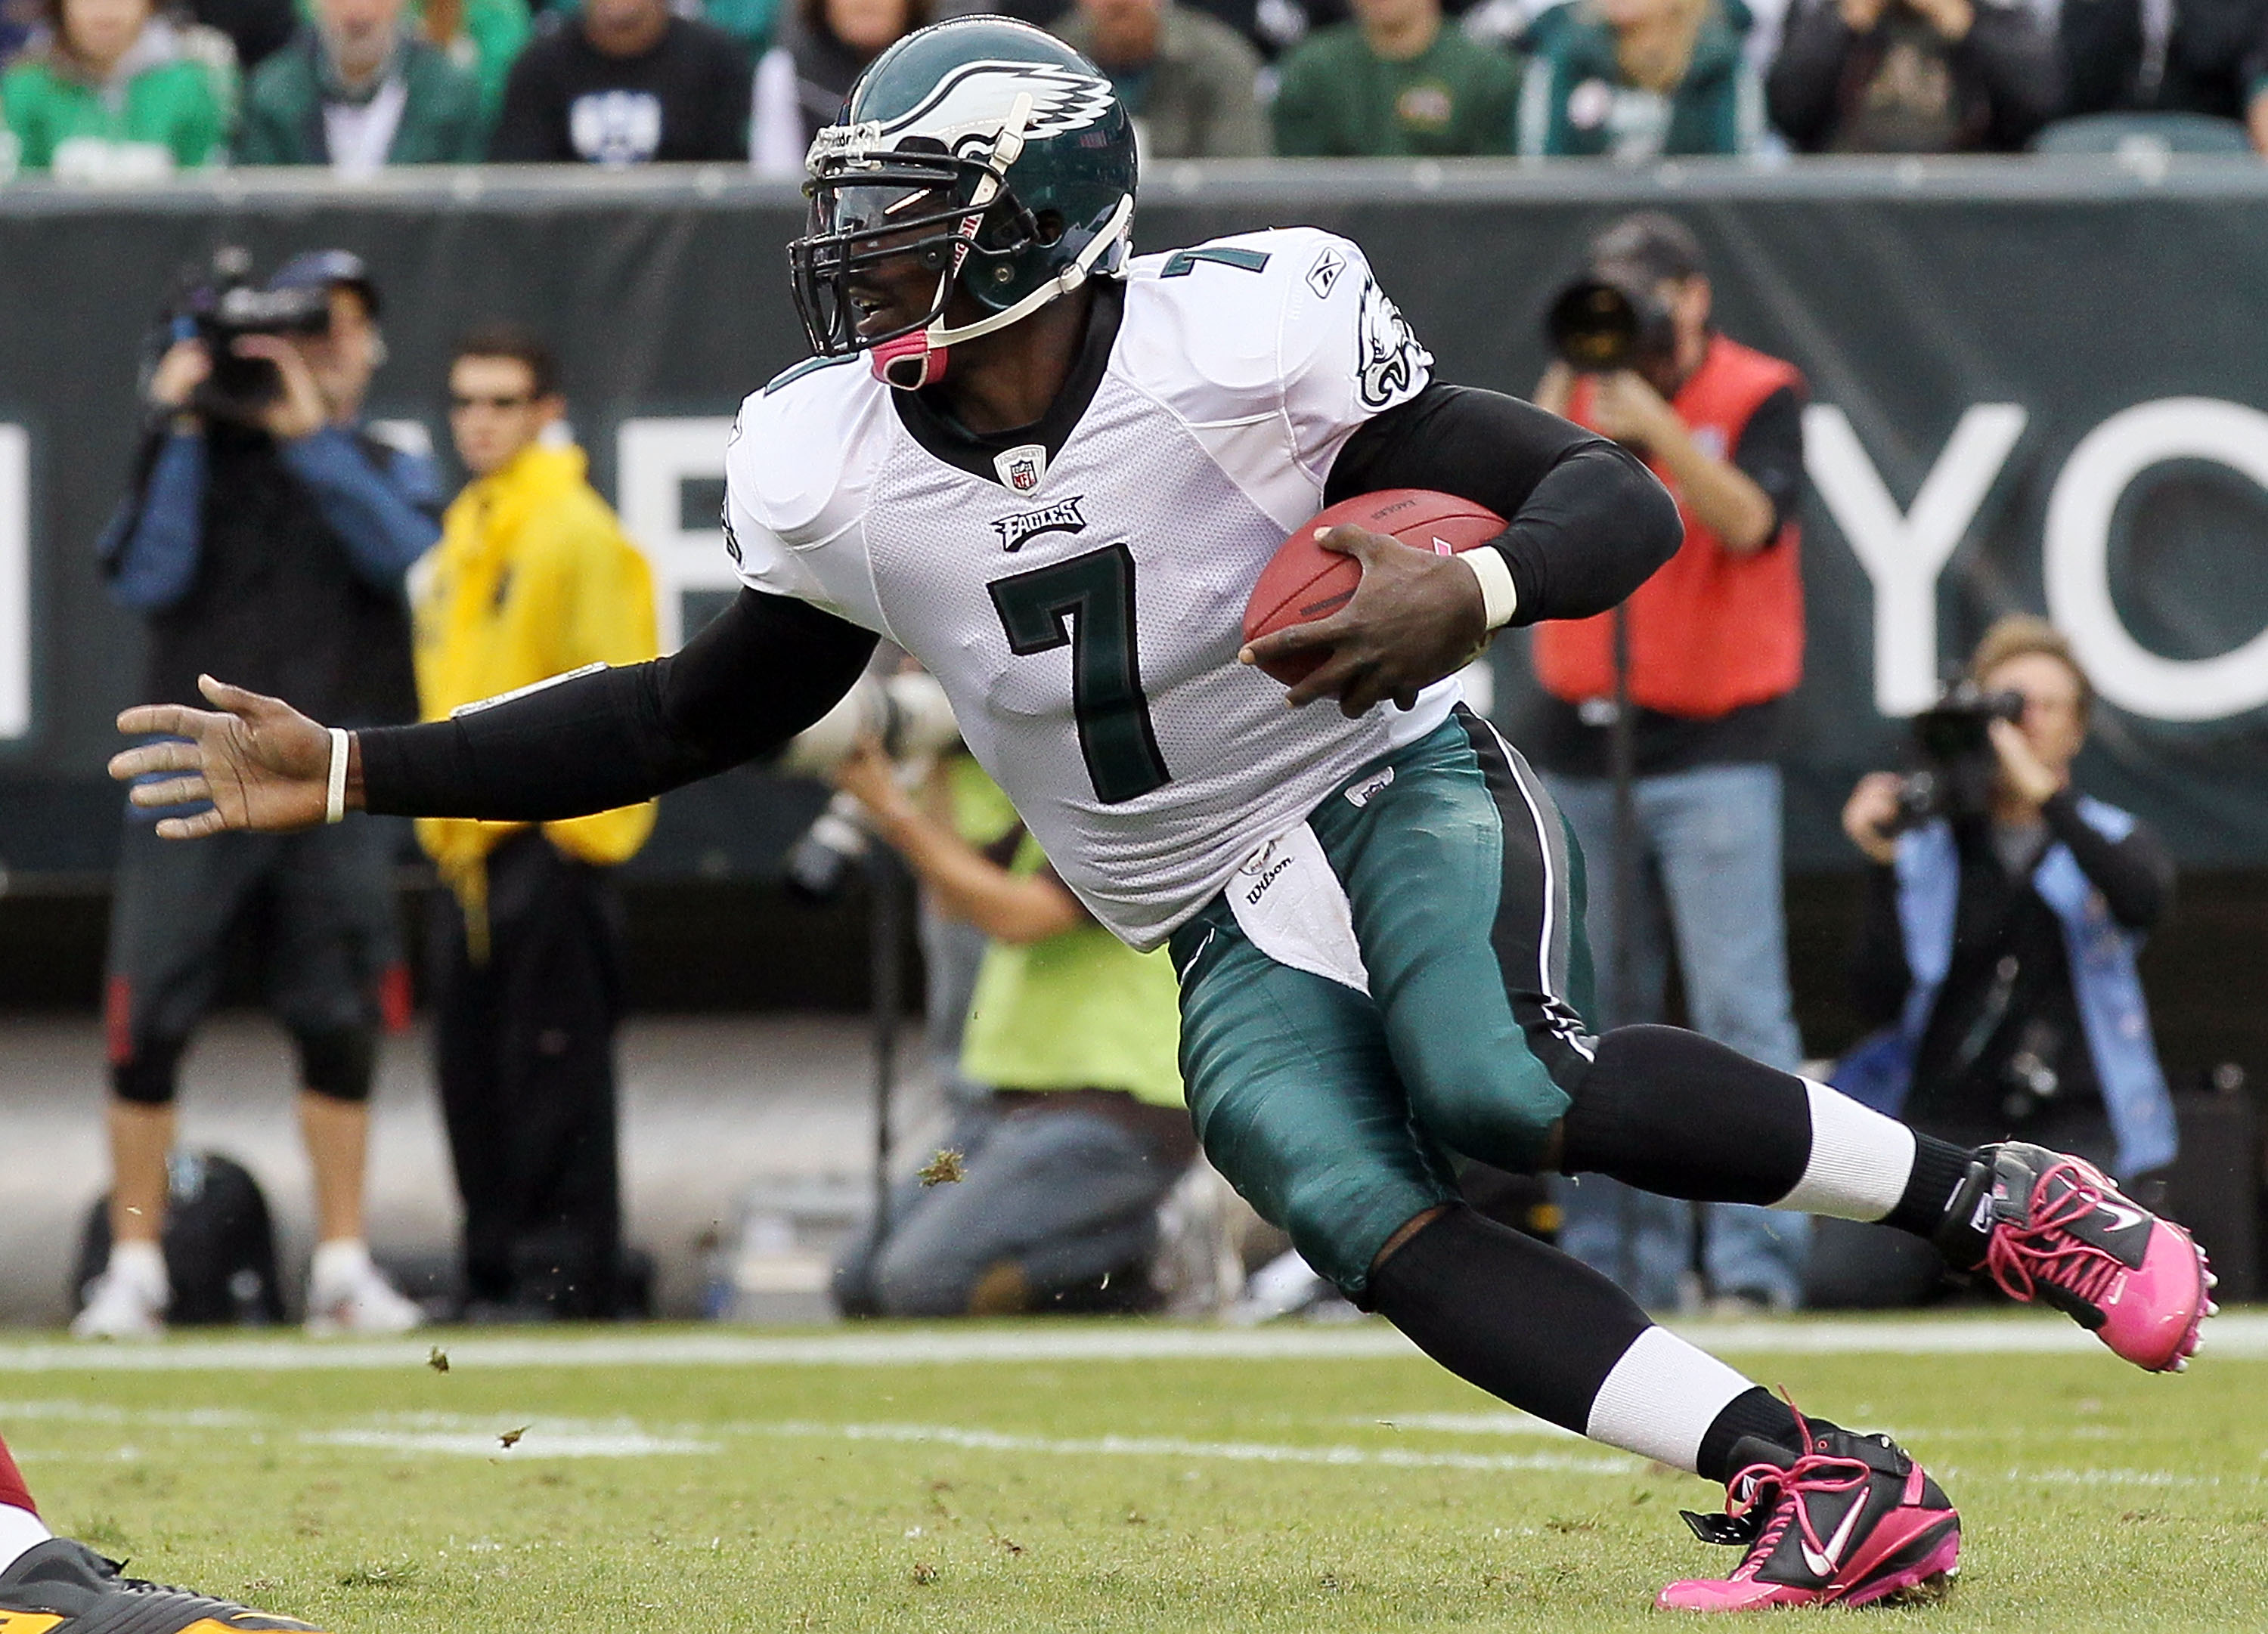 PHILADELPHIA - OCTOBER 03:  Michael Vick #7 of the Philadelphia Eagles runs the ball against the Washington Redskins on October 3, 2010 at Lincoln Financial Field in Philadelphia, Pennsylvania.  (Photo by Jim McIsaac/Getty Images)